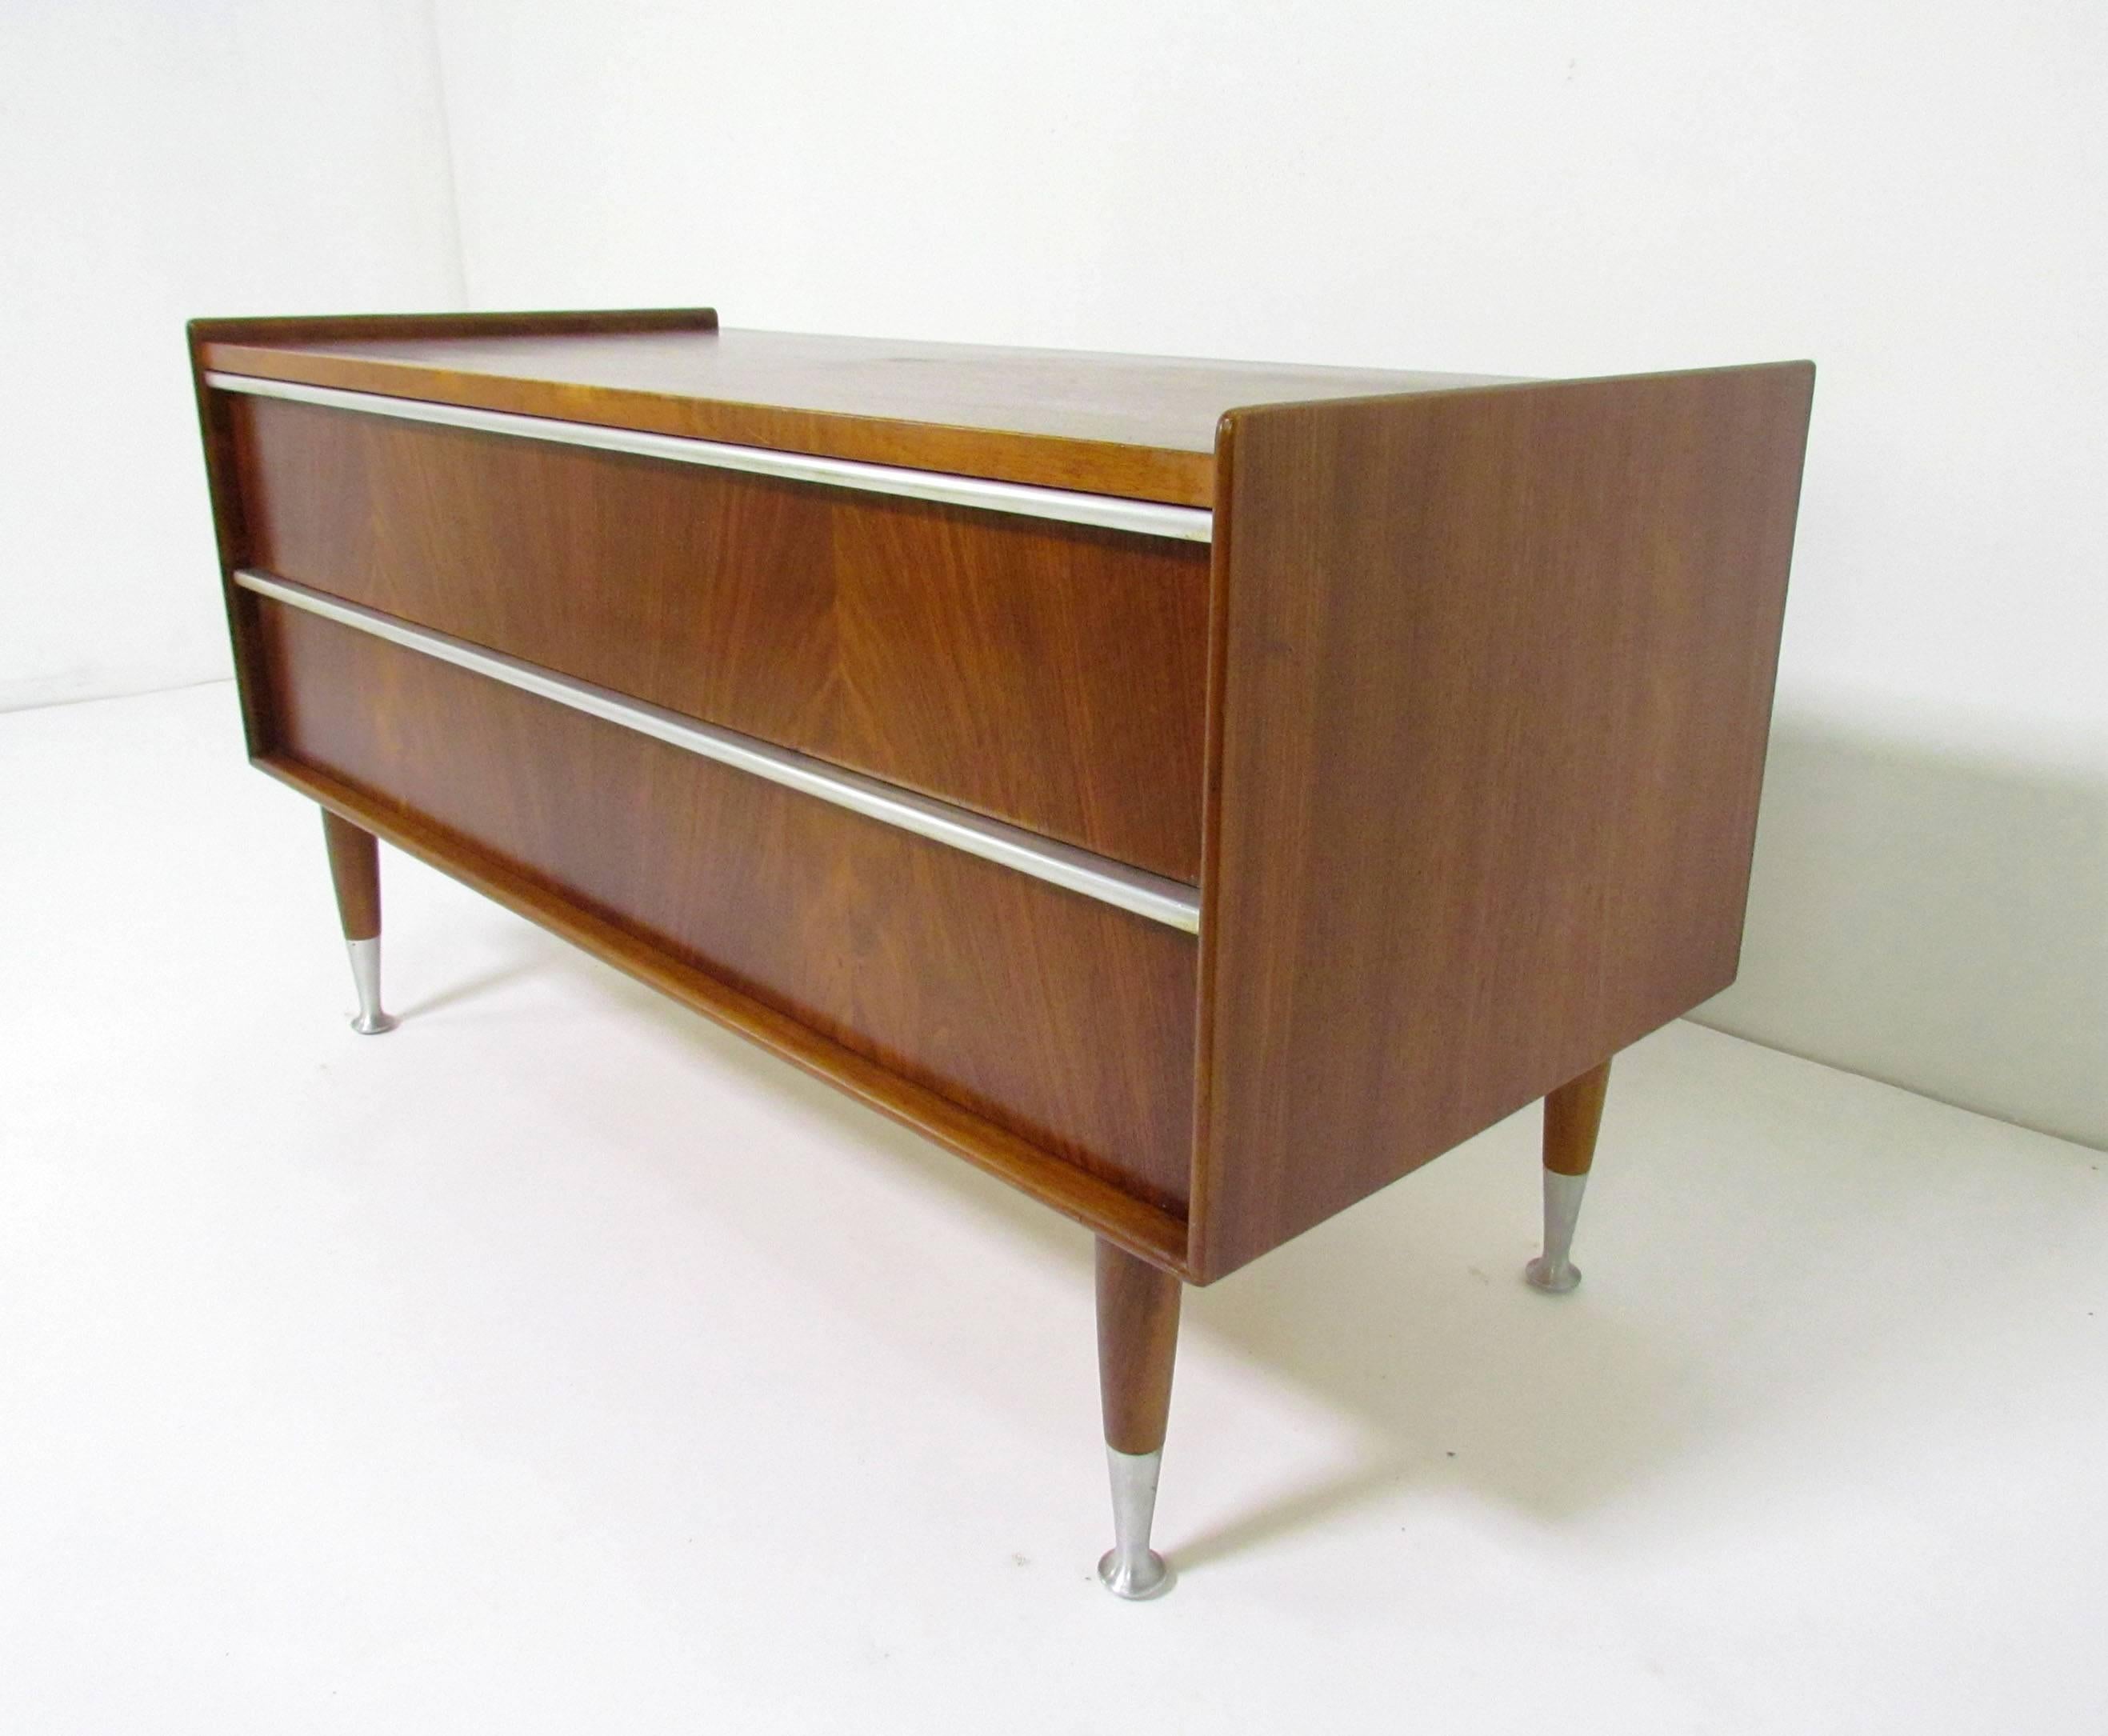 Mid-Century low blanket two-drawer chest in walnut with aluminium pulls and spun aluminium feet, designed by Edmond Spence, made in Sweden, in the early Danish modern style. Stabile enough to also serve as an end of bed bench while one puts on